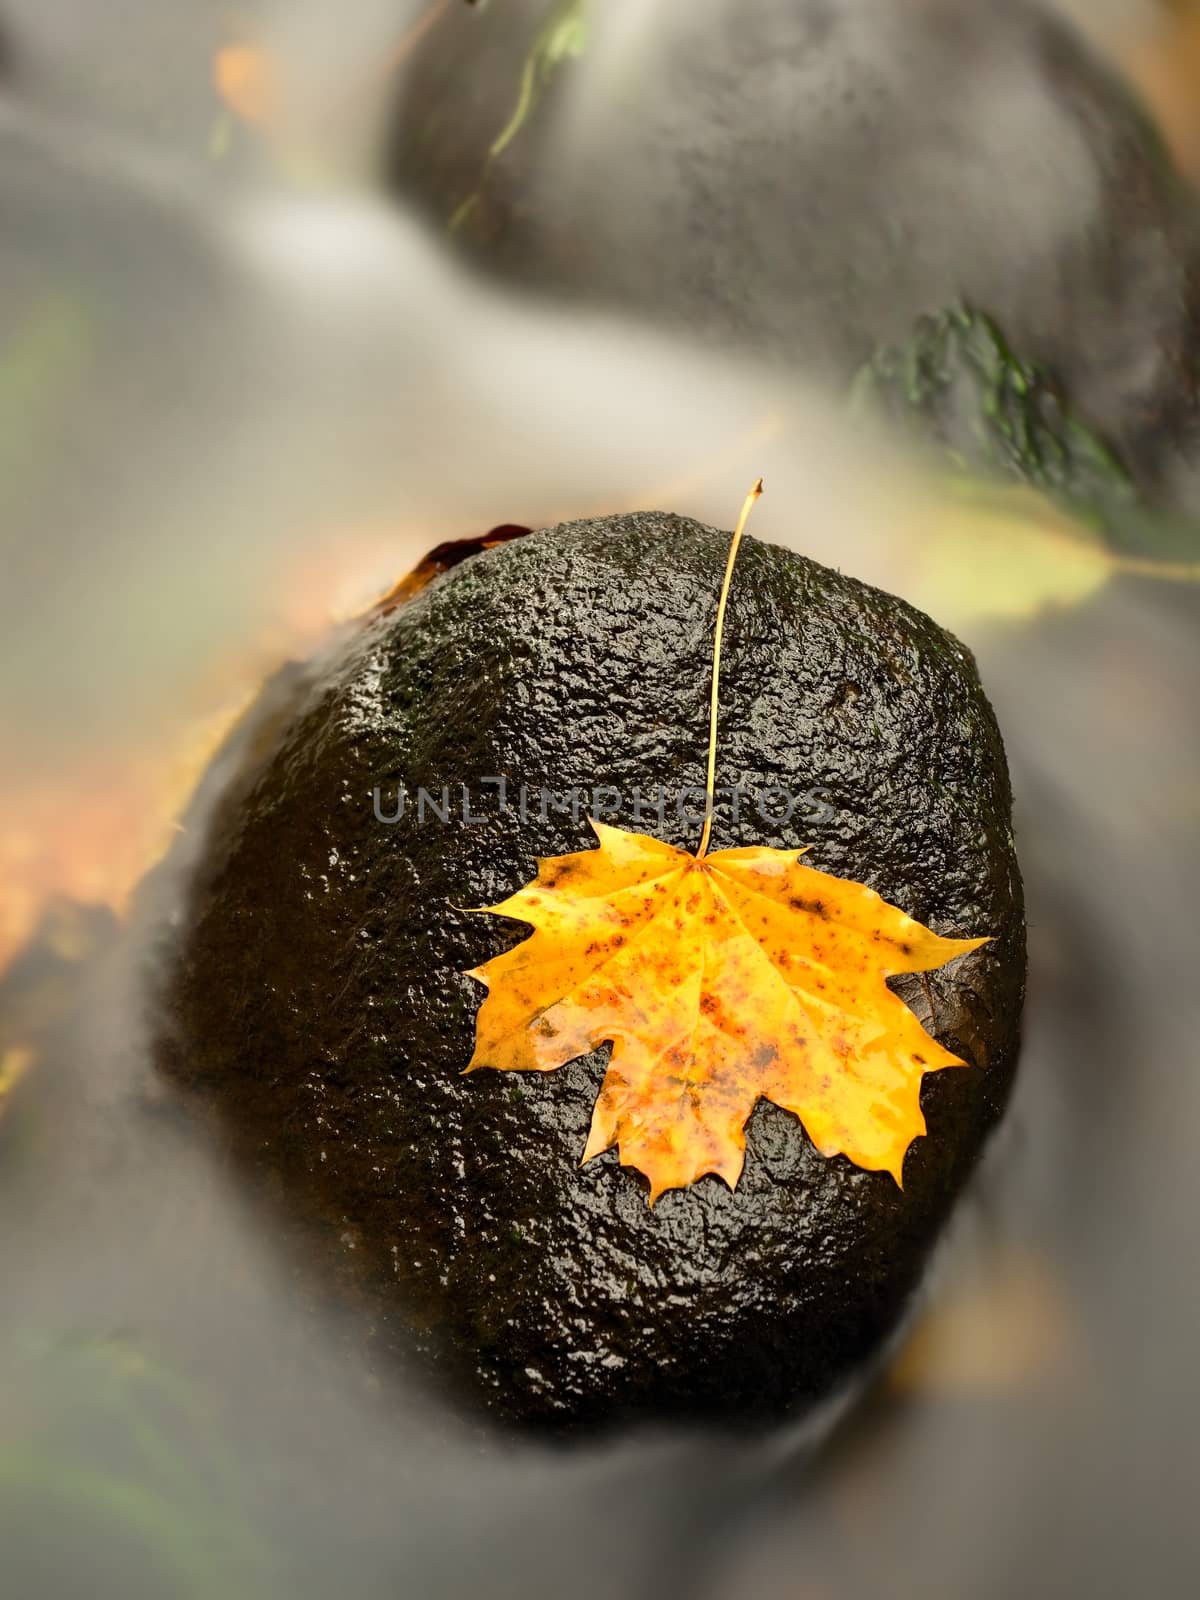 The colorful broken leaf from maple tree on basalt stones in blurred water by rdonar2